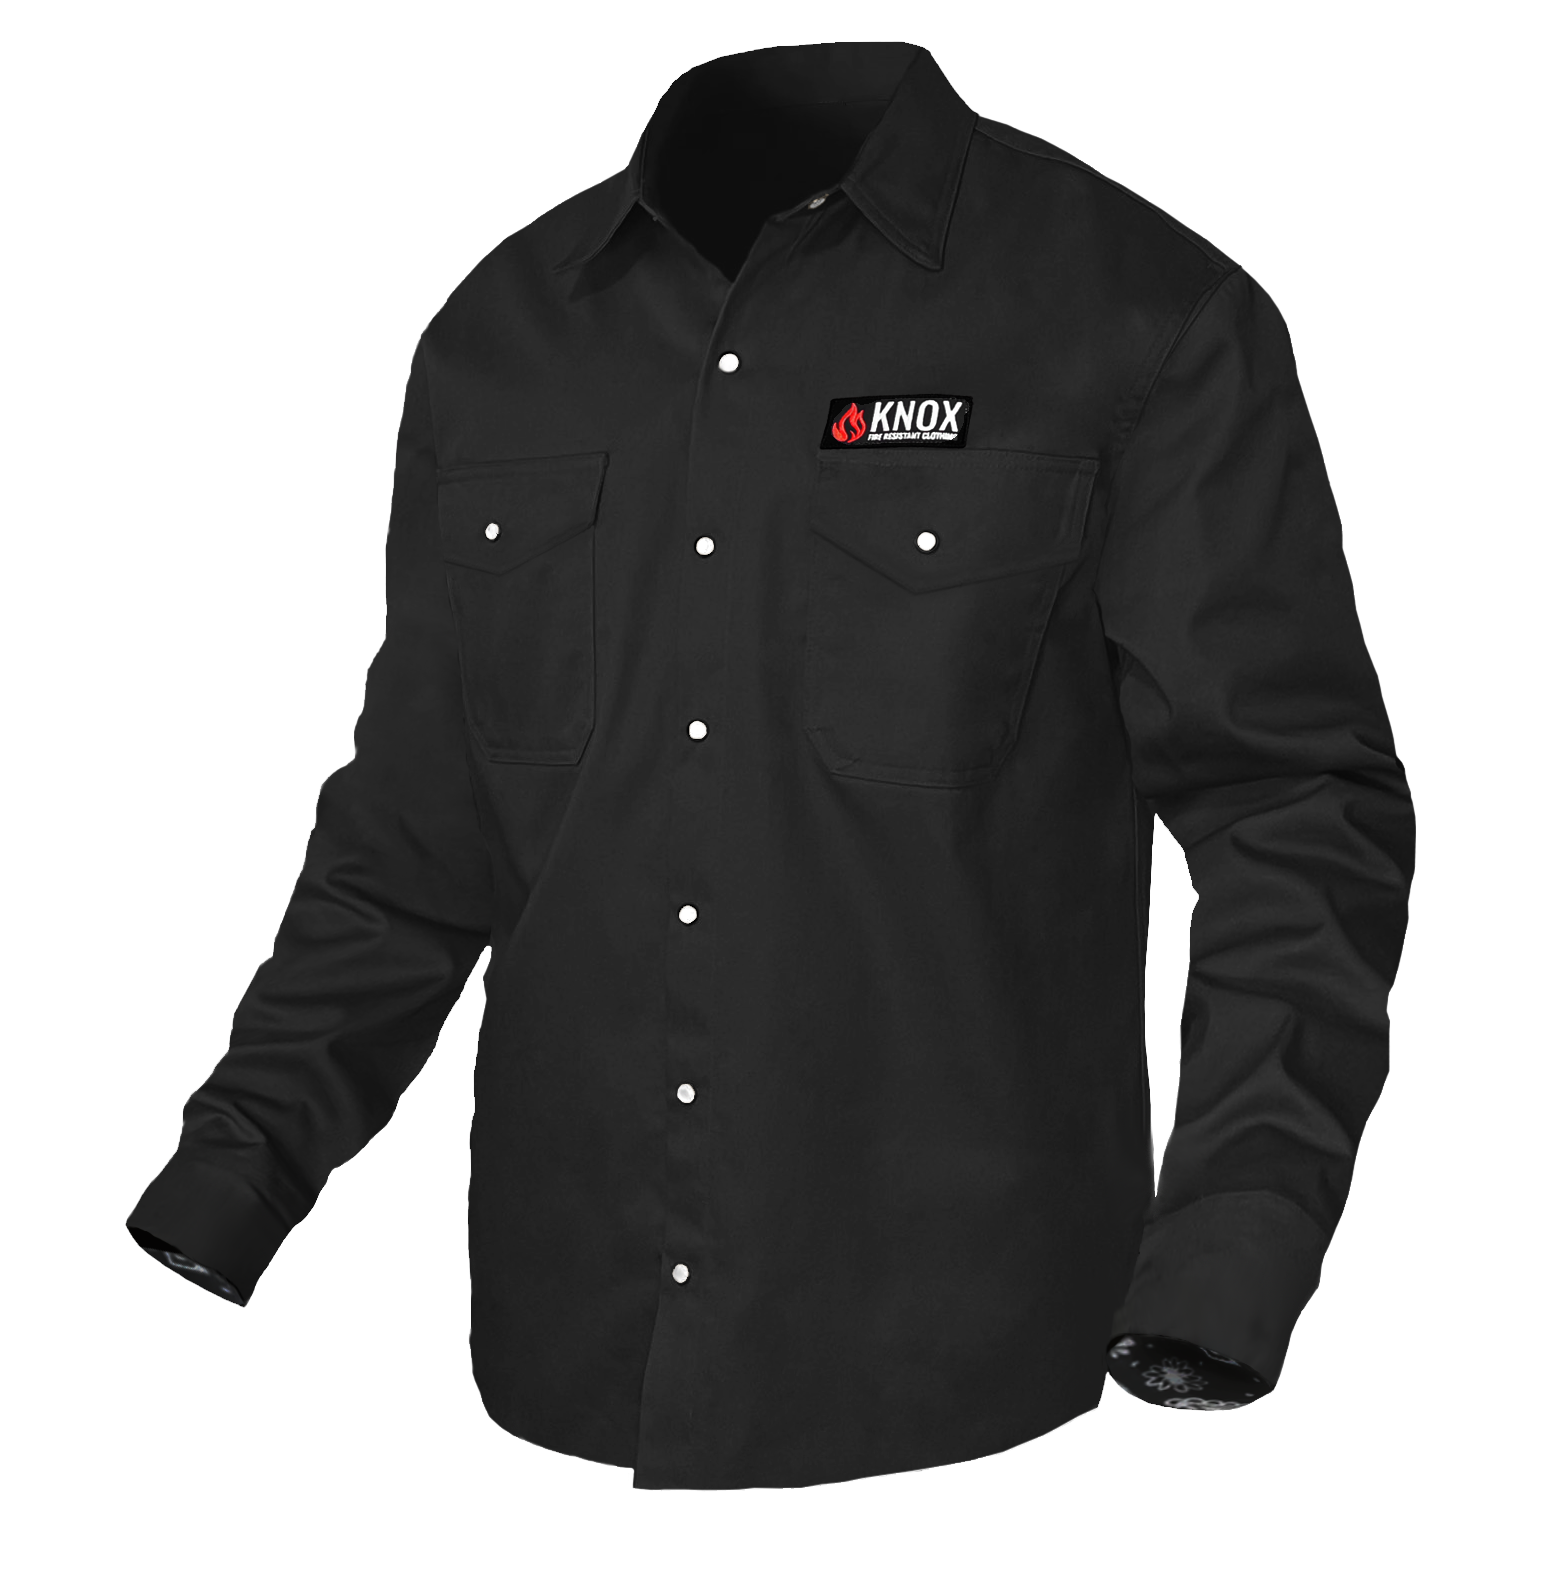 The Black Pearl Edition FR Shirt With Pearl Snap Buttons